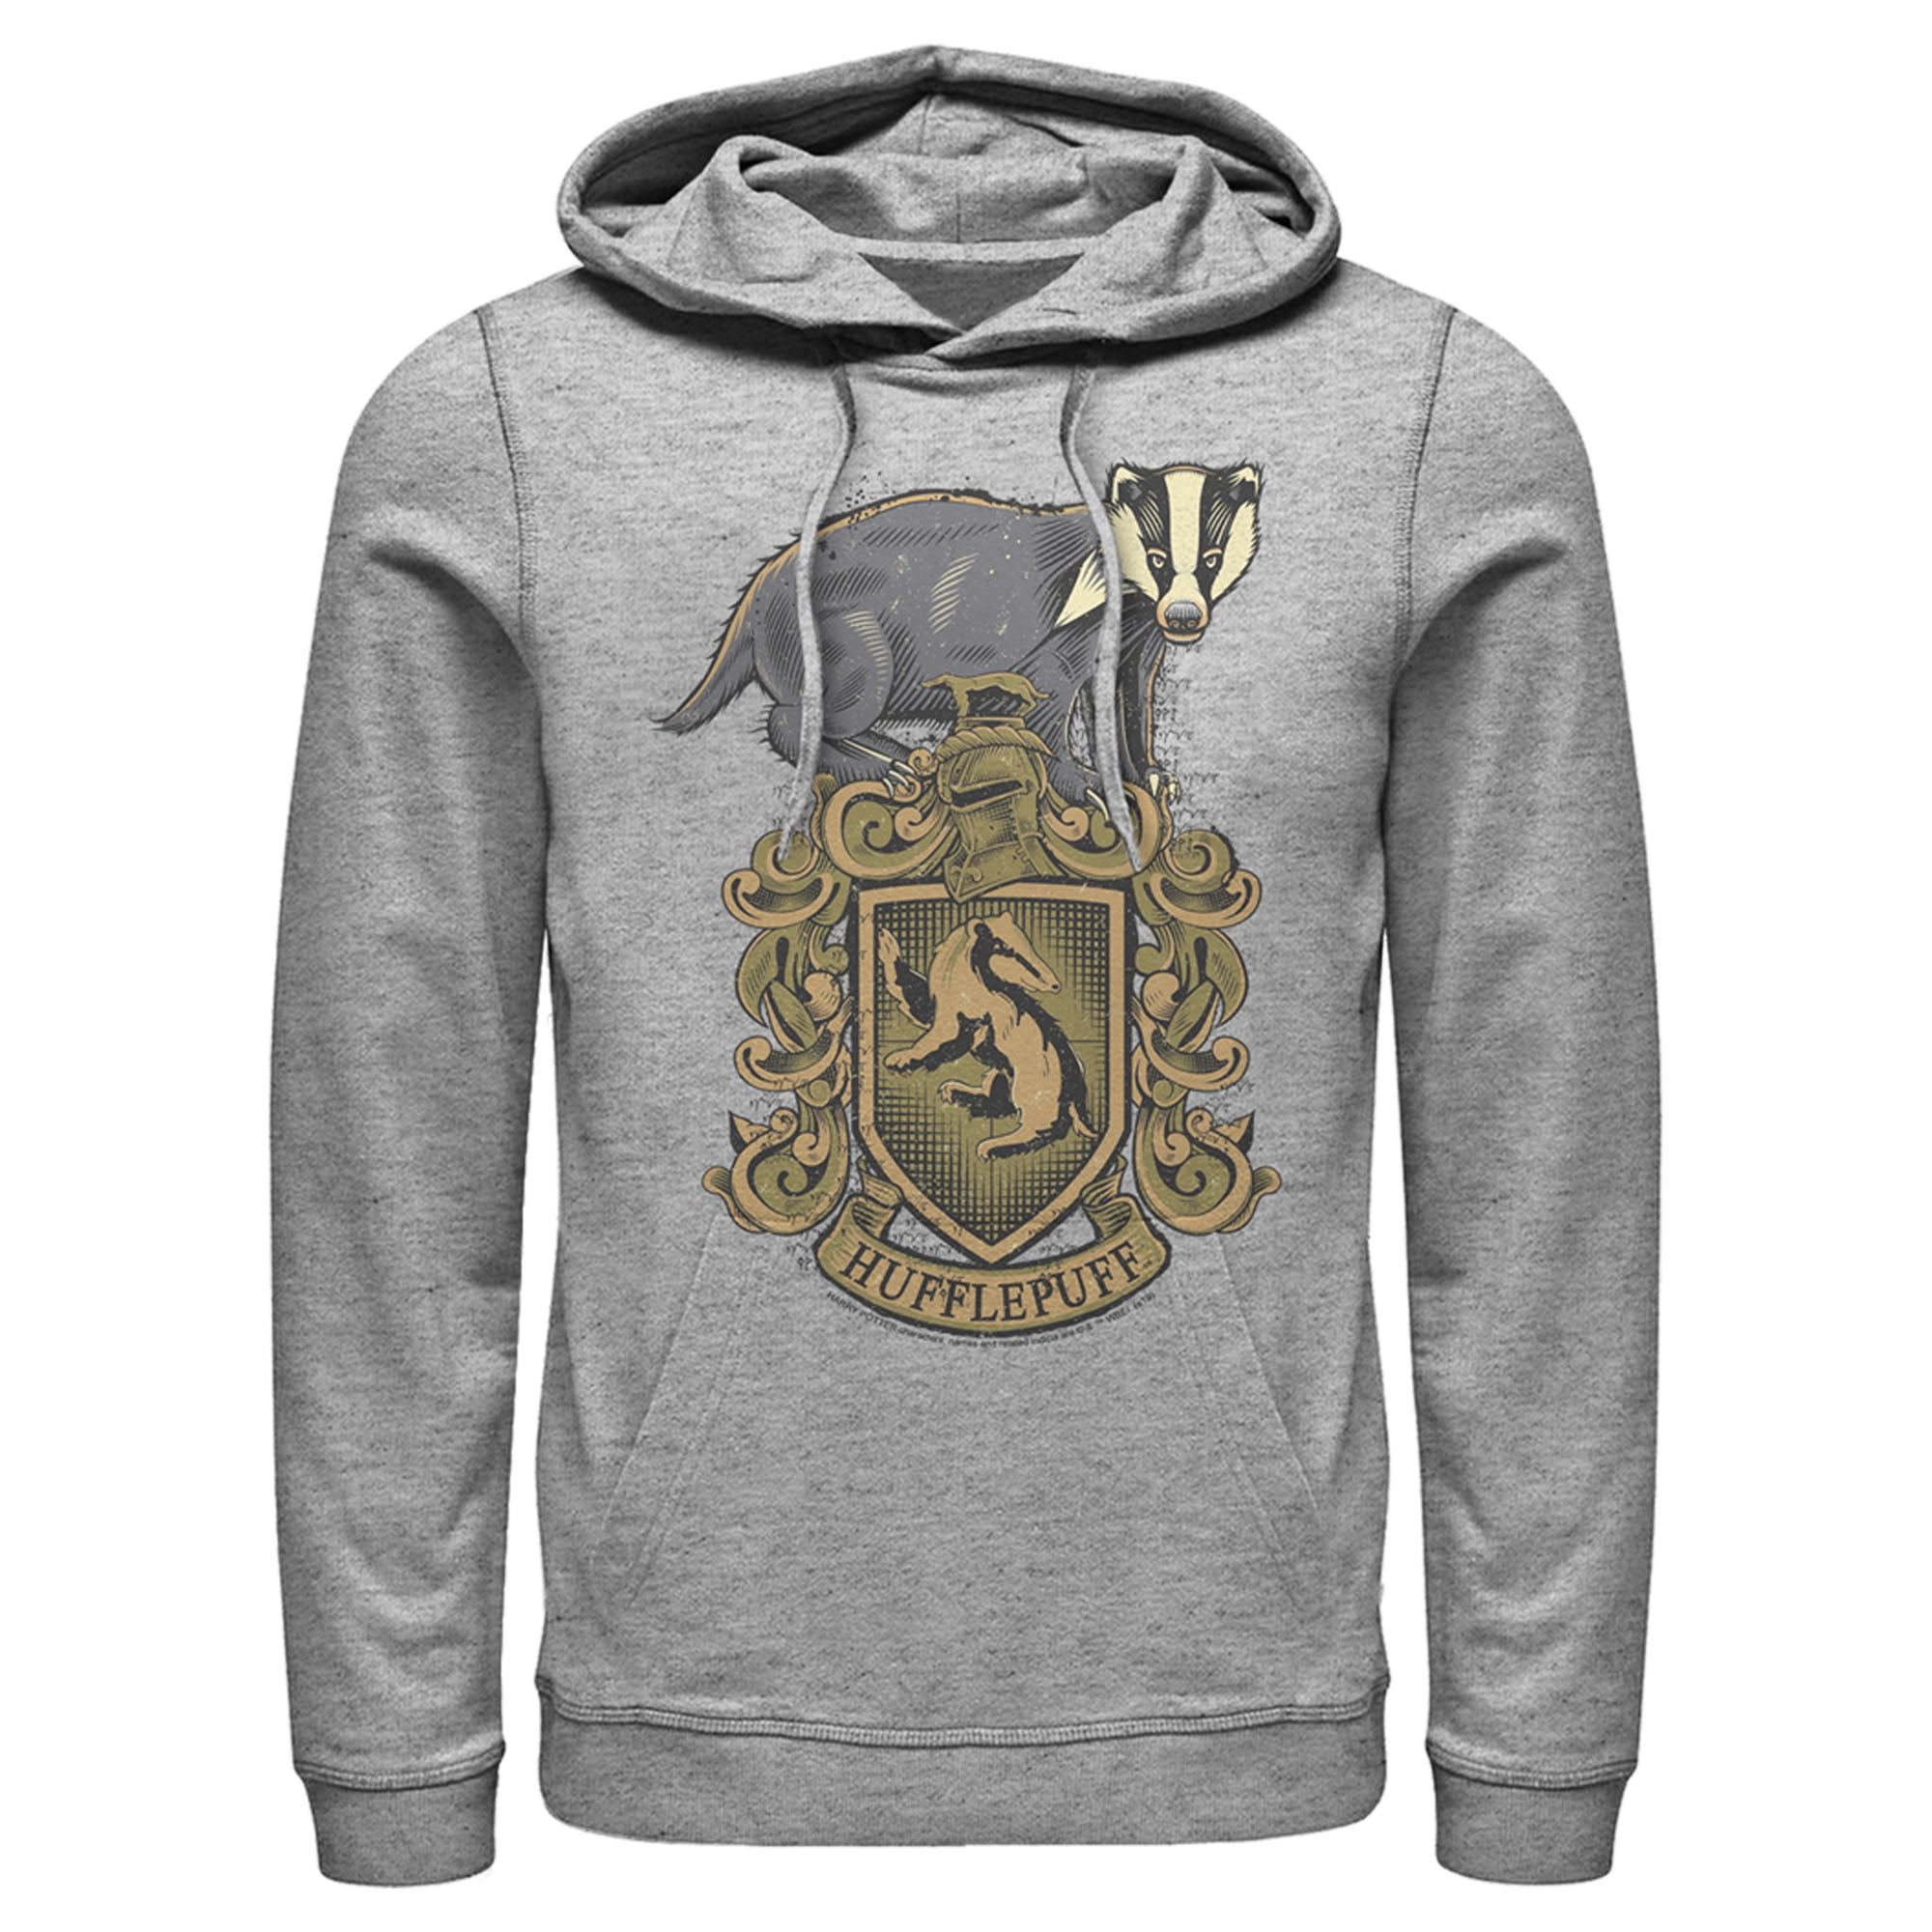 Sweatshirt Harry Potter Hufflepuff Original Coat-of-arms Home hooded Official 